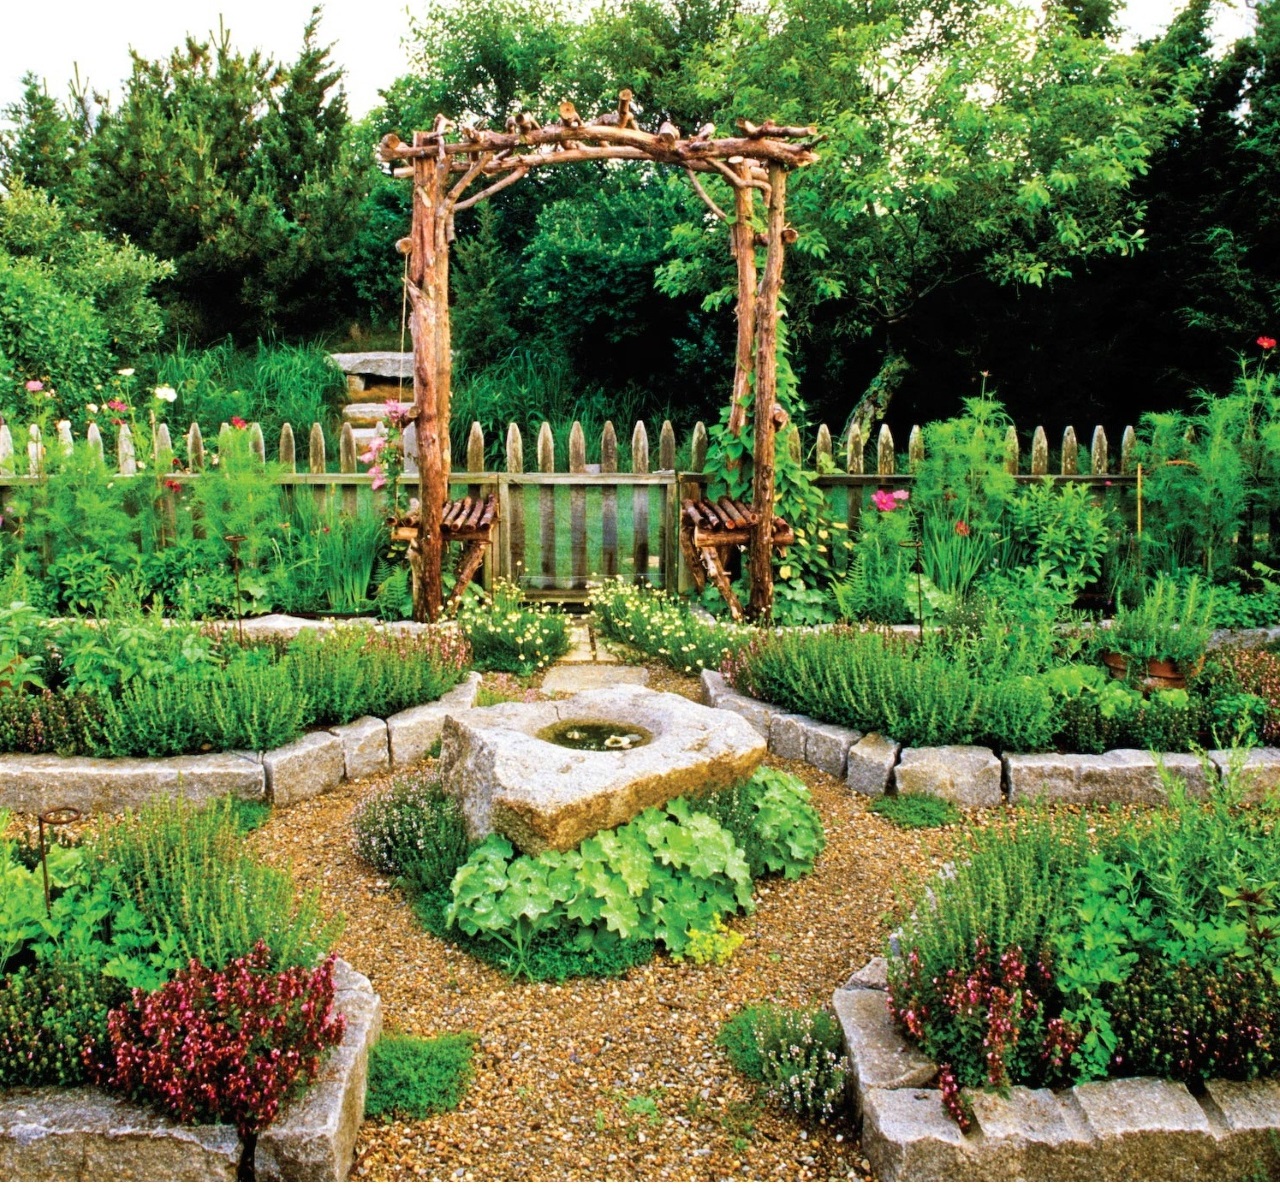 5 Top Tips on Approaching a Garden Renovation